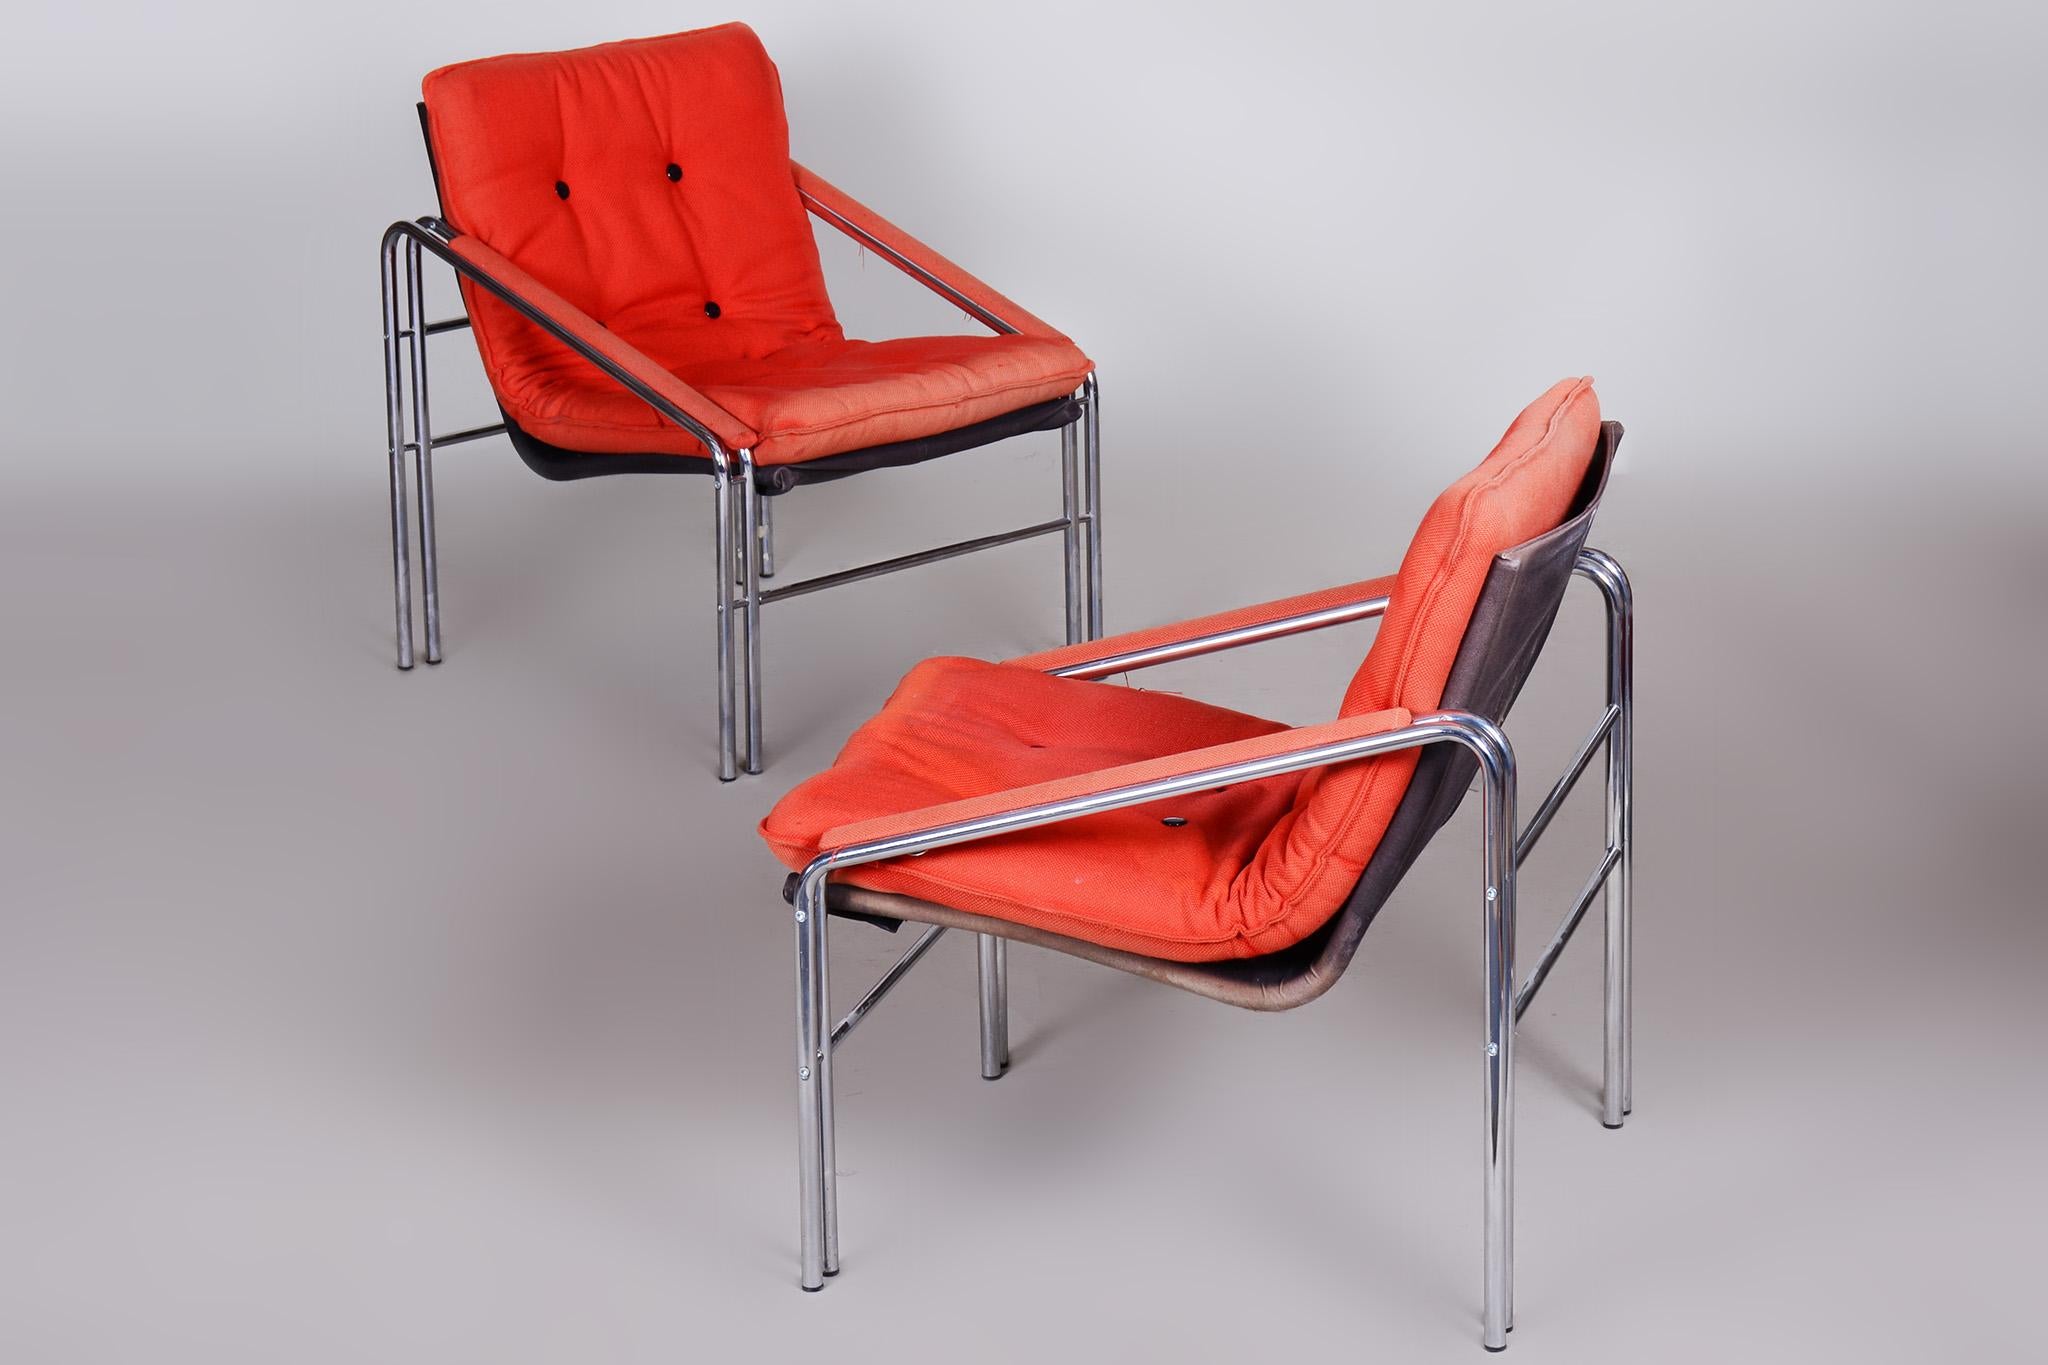 Original Pair of Midcentury Armchairs, Very Well-Preserved, Czechia, 1960s For Sale 1